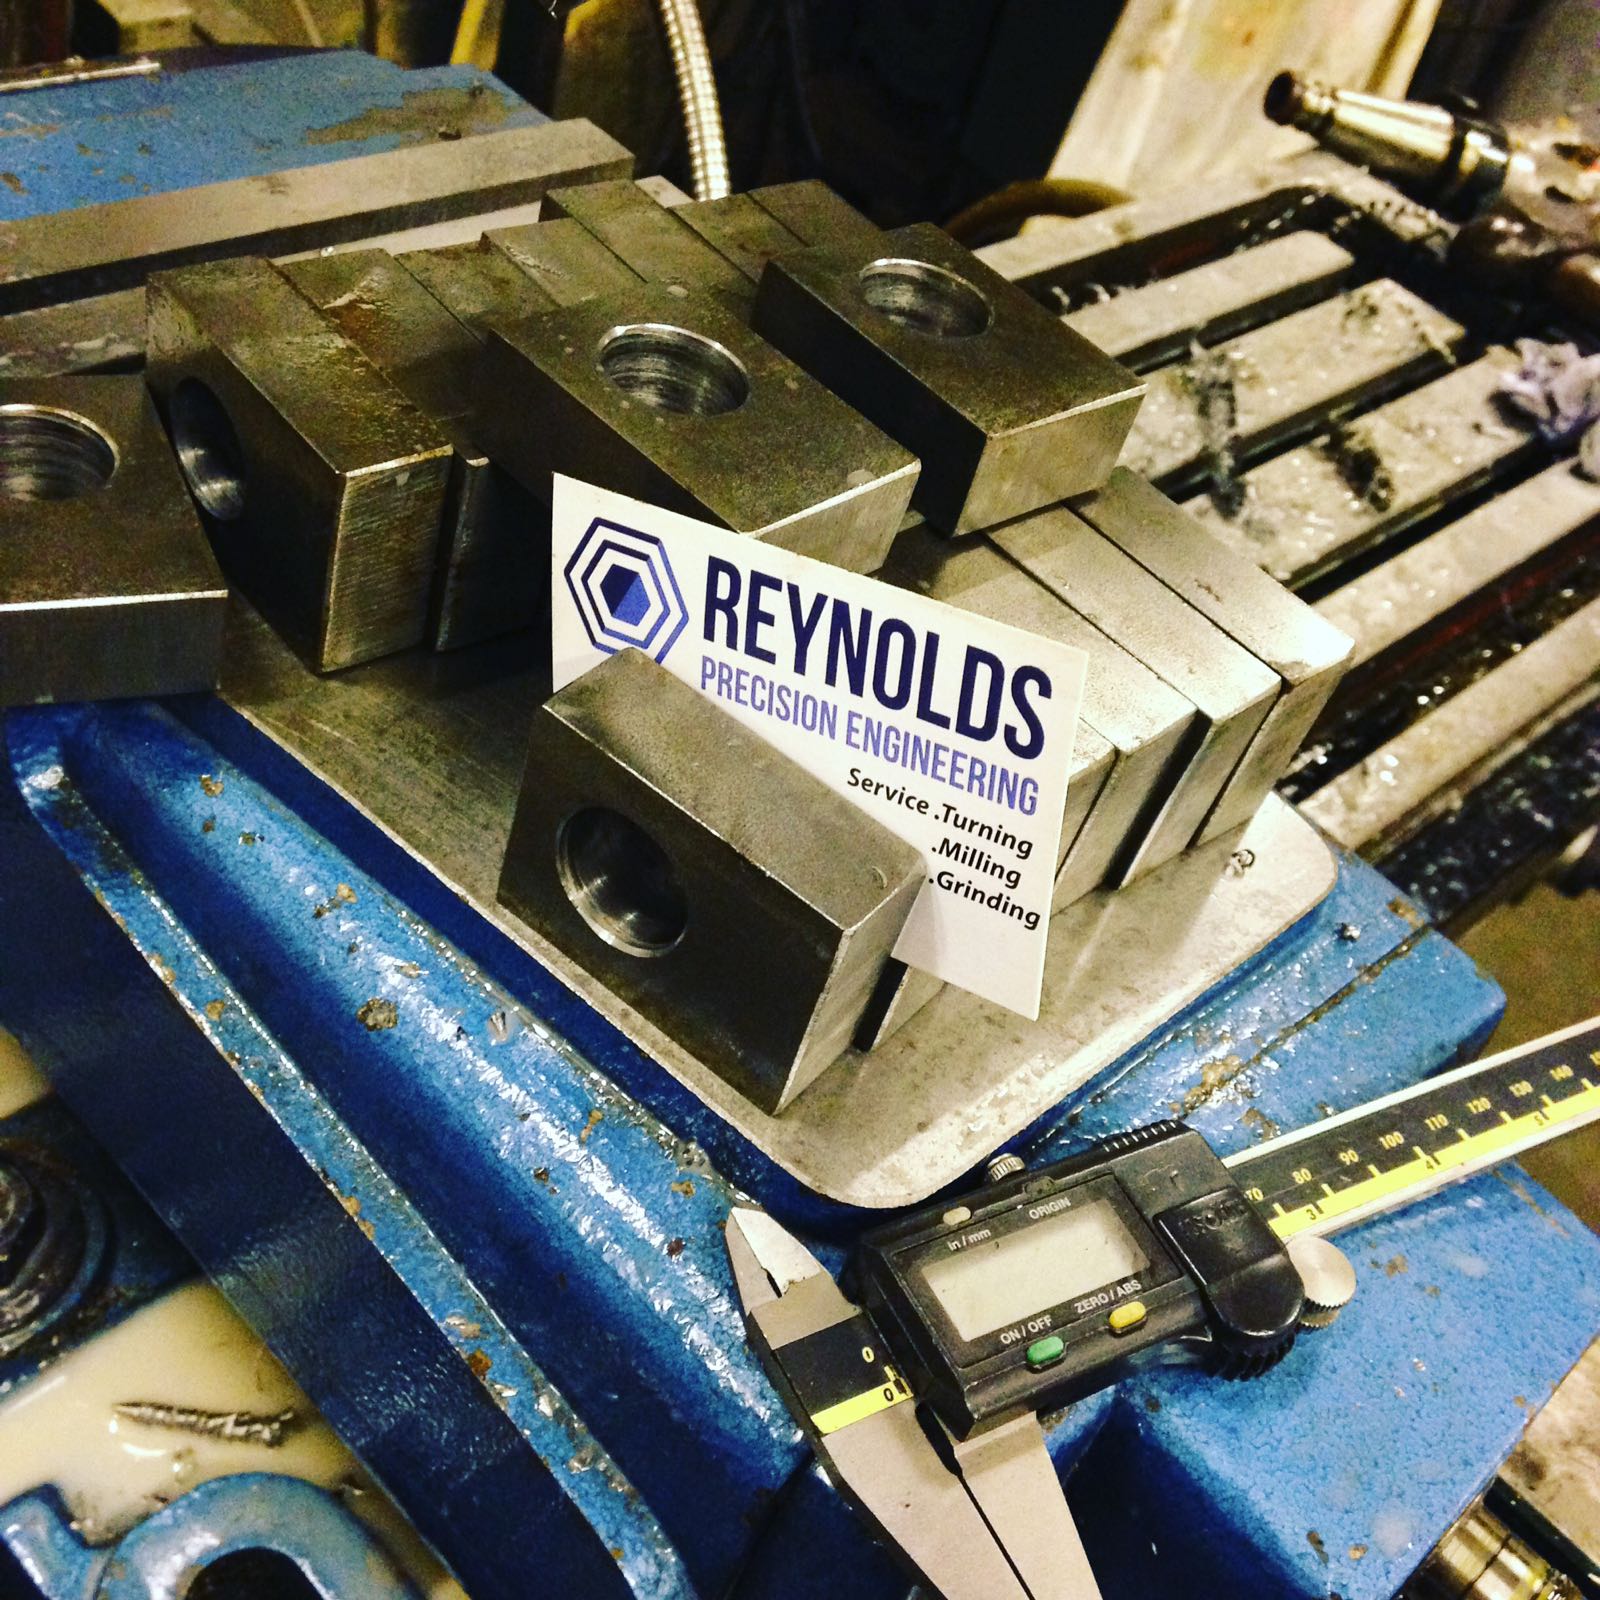 Our homepage image. Showing our contact information and the Reynolds Precision Engineering business card.